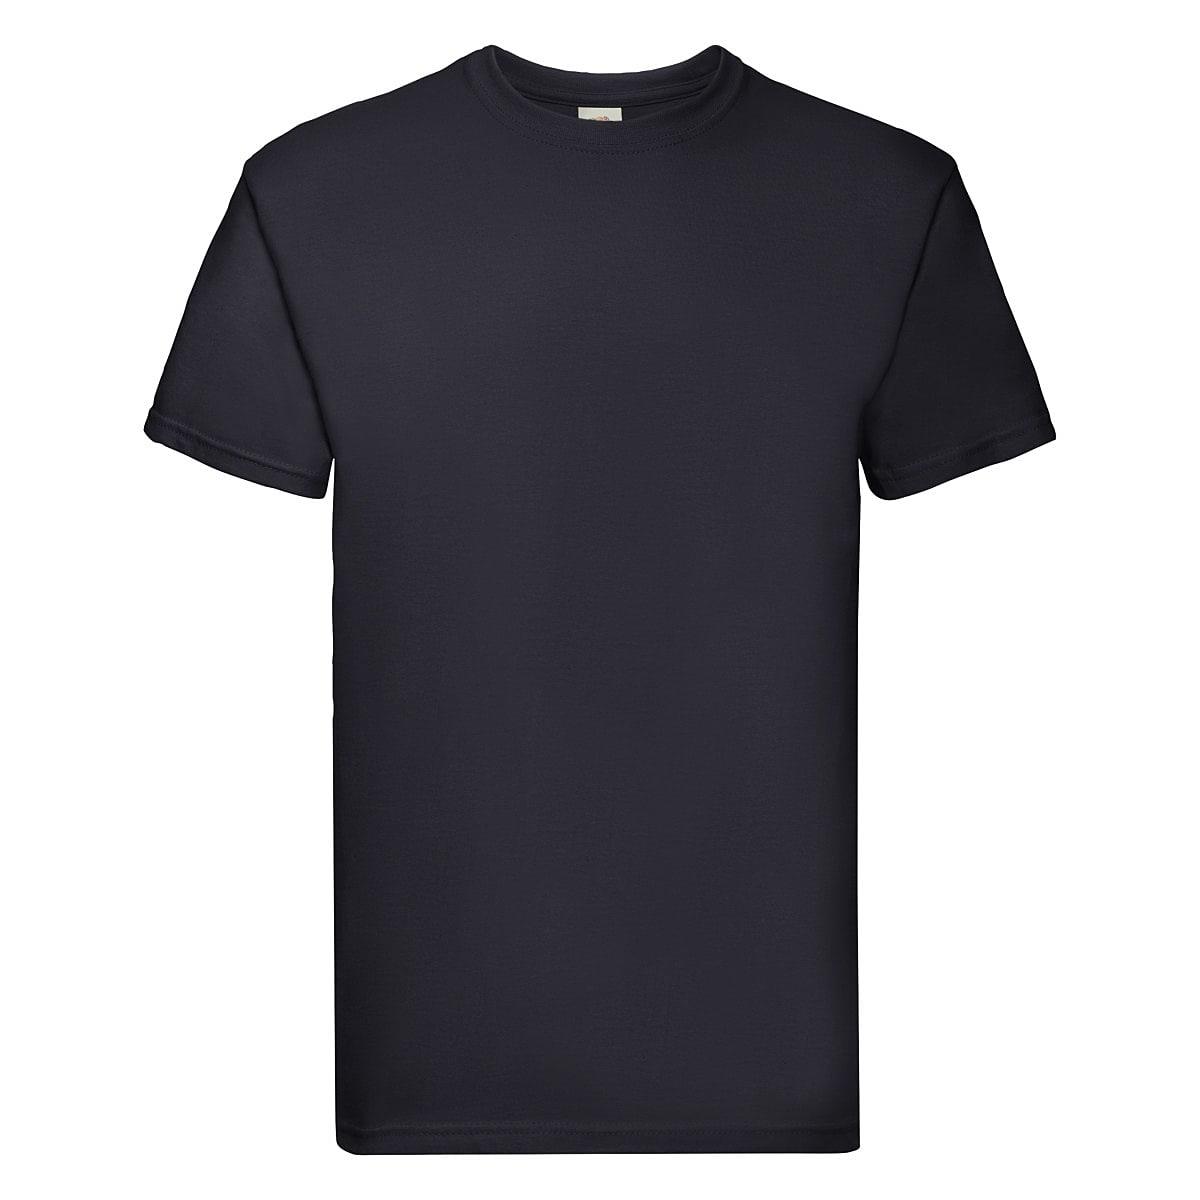 Fruit Of The Loom Super Premium T-Shirt in Deep Navy (Product Code: 61044)